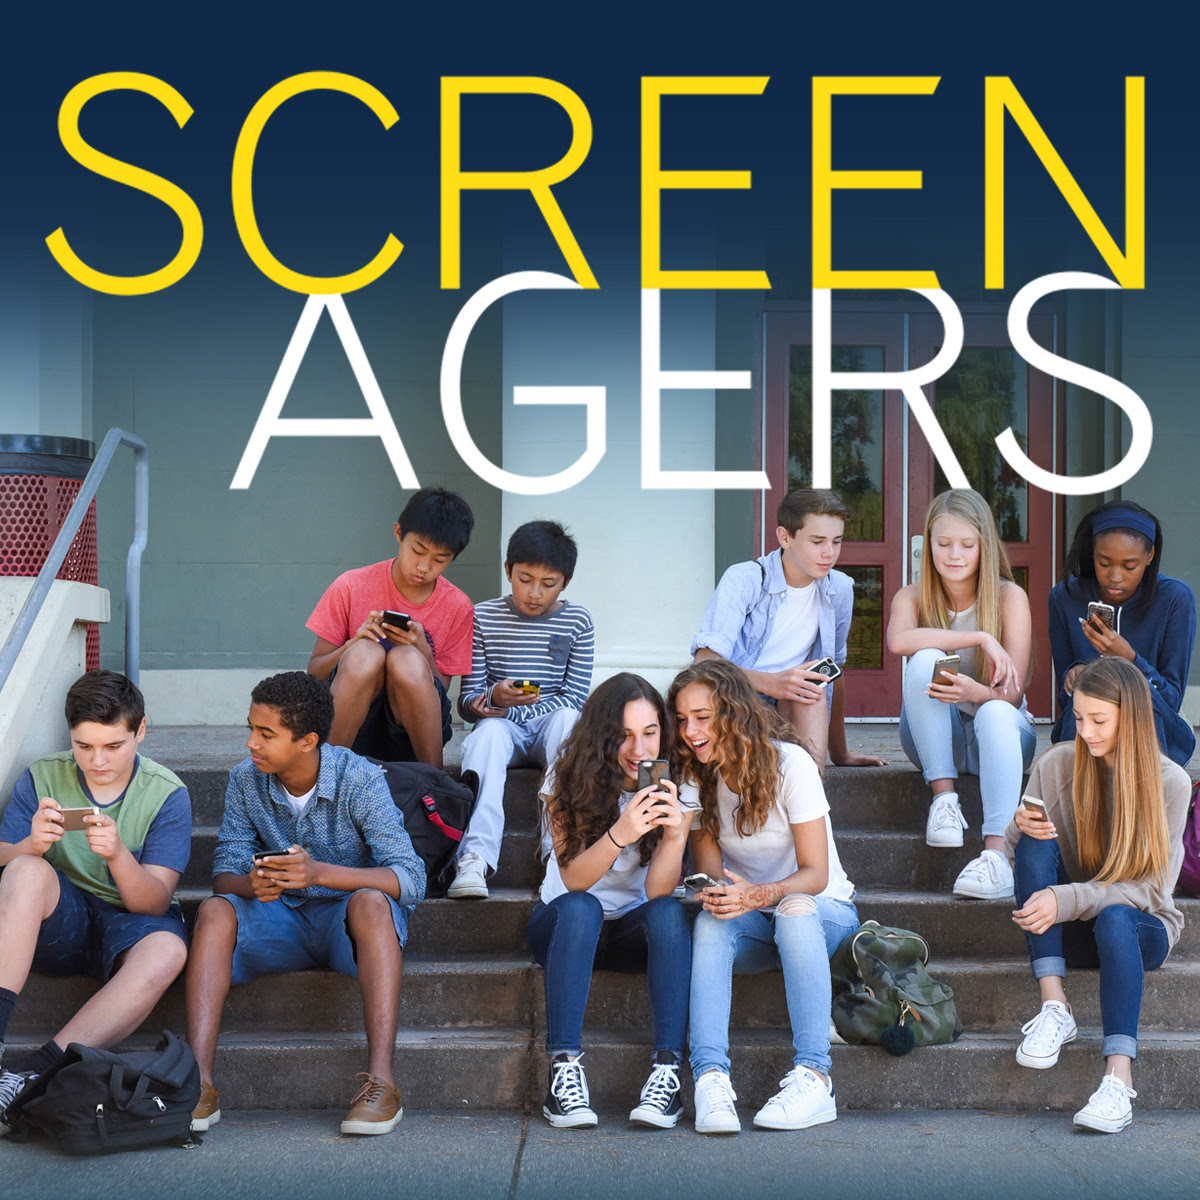 Screenagers Film Presented By GRACE Christian School